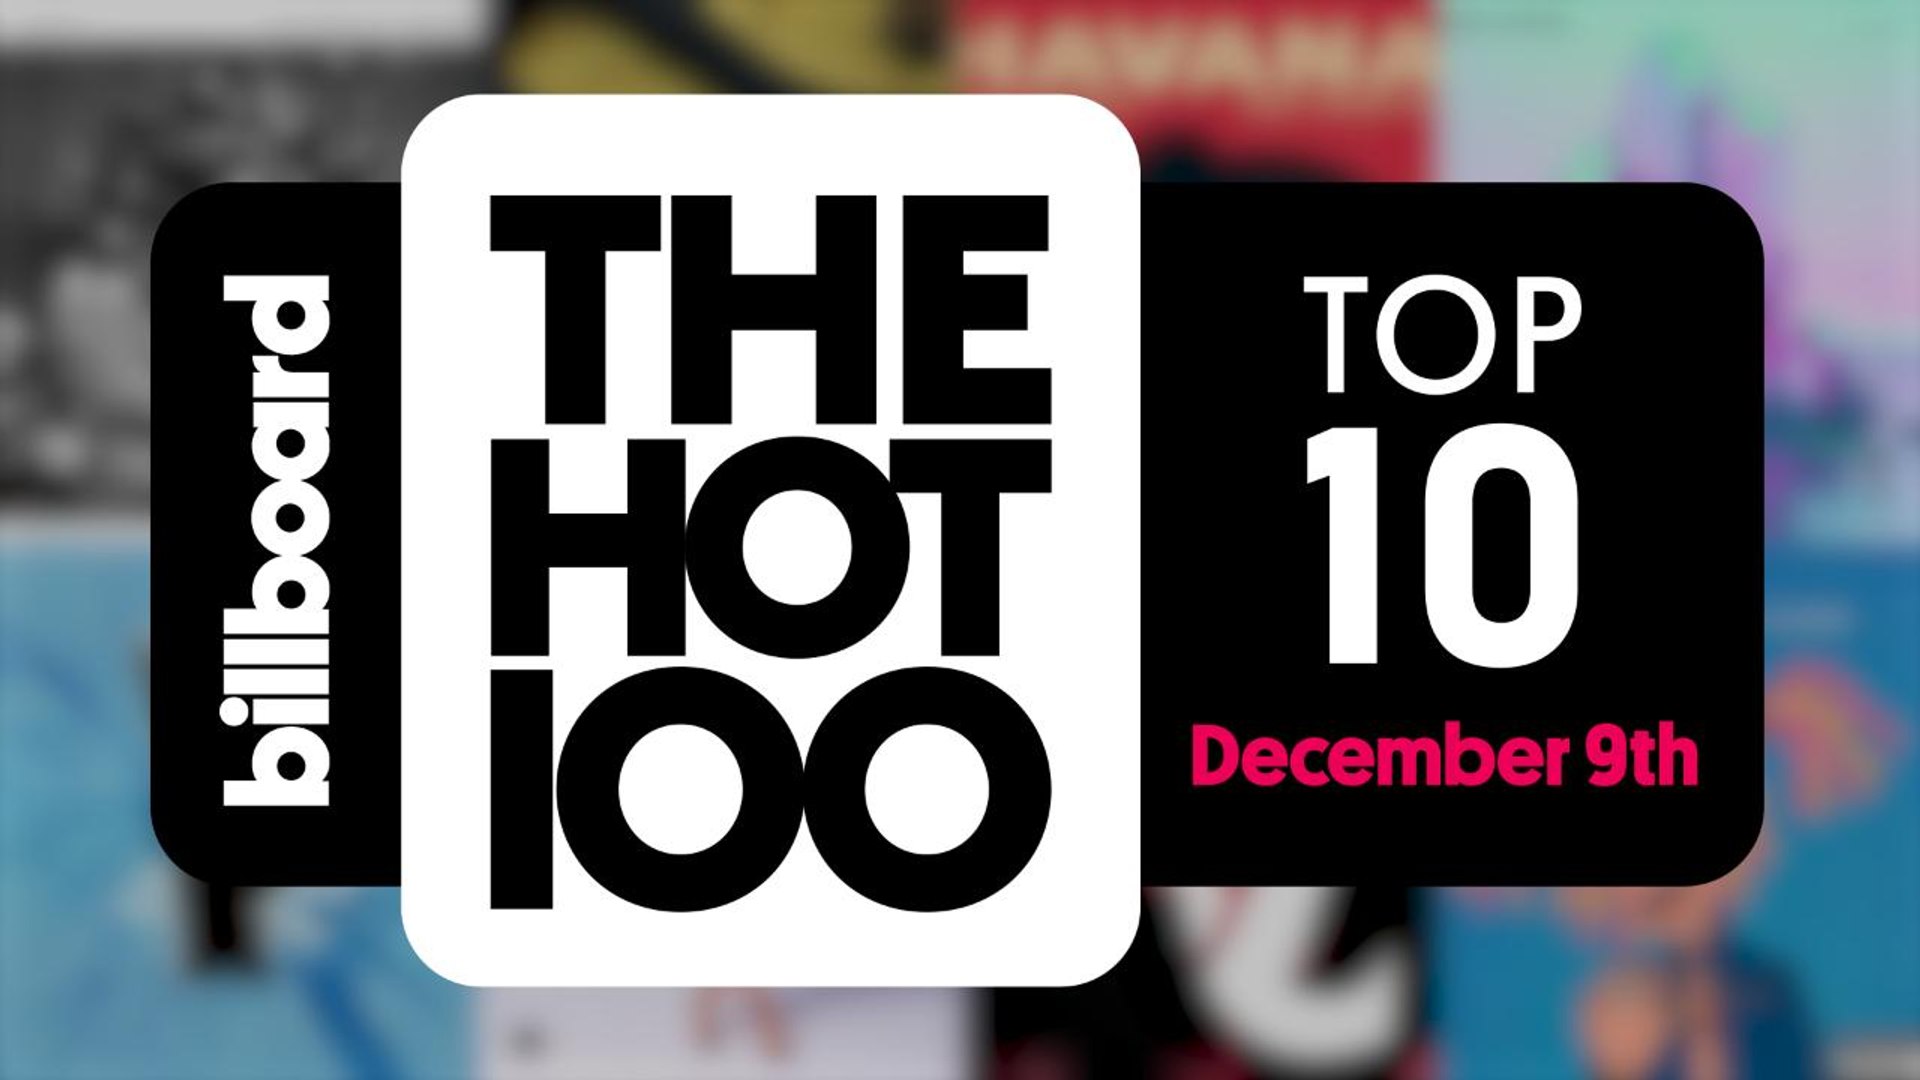 Early Release! Billboard Hot 100 Top 10 December 9th 2017 Countdown | Official